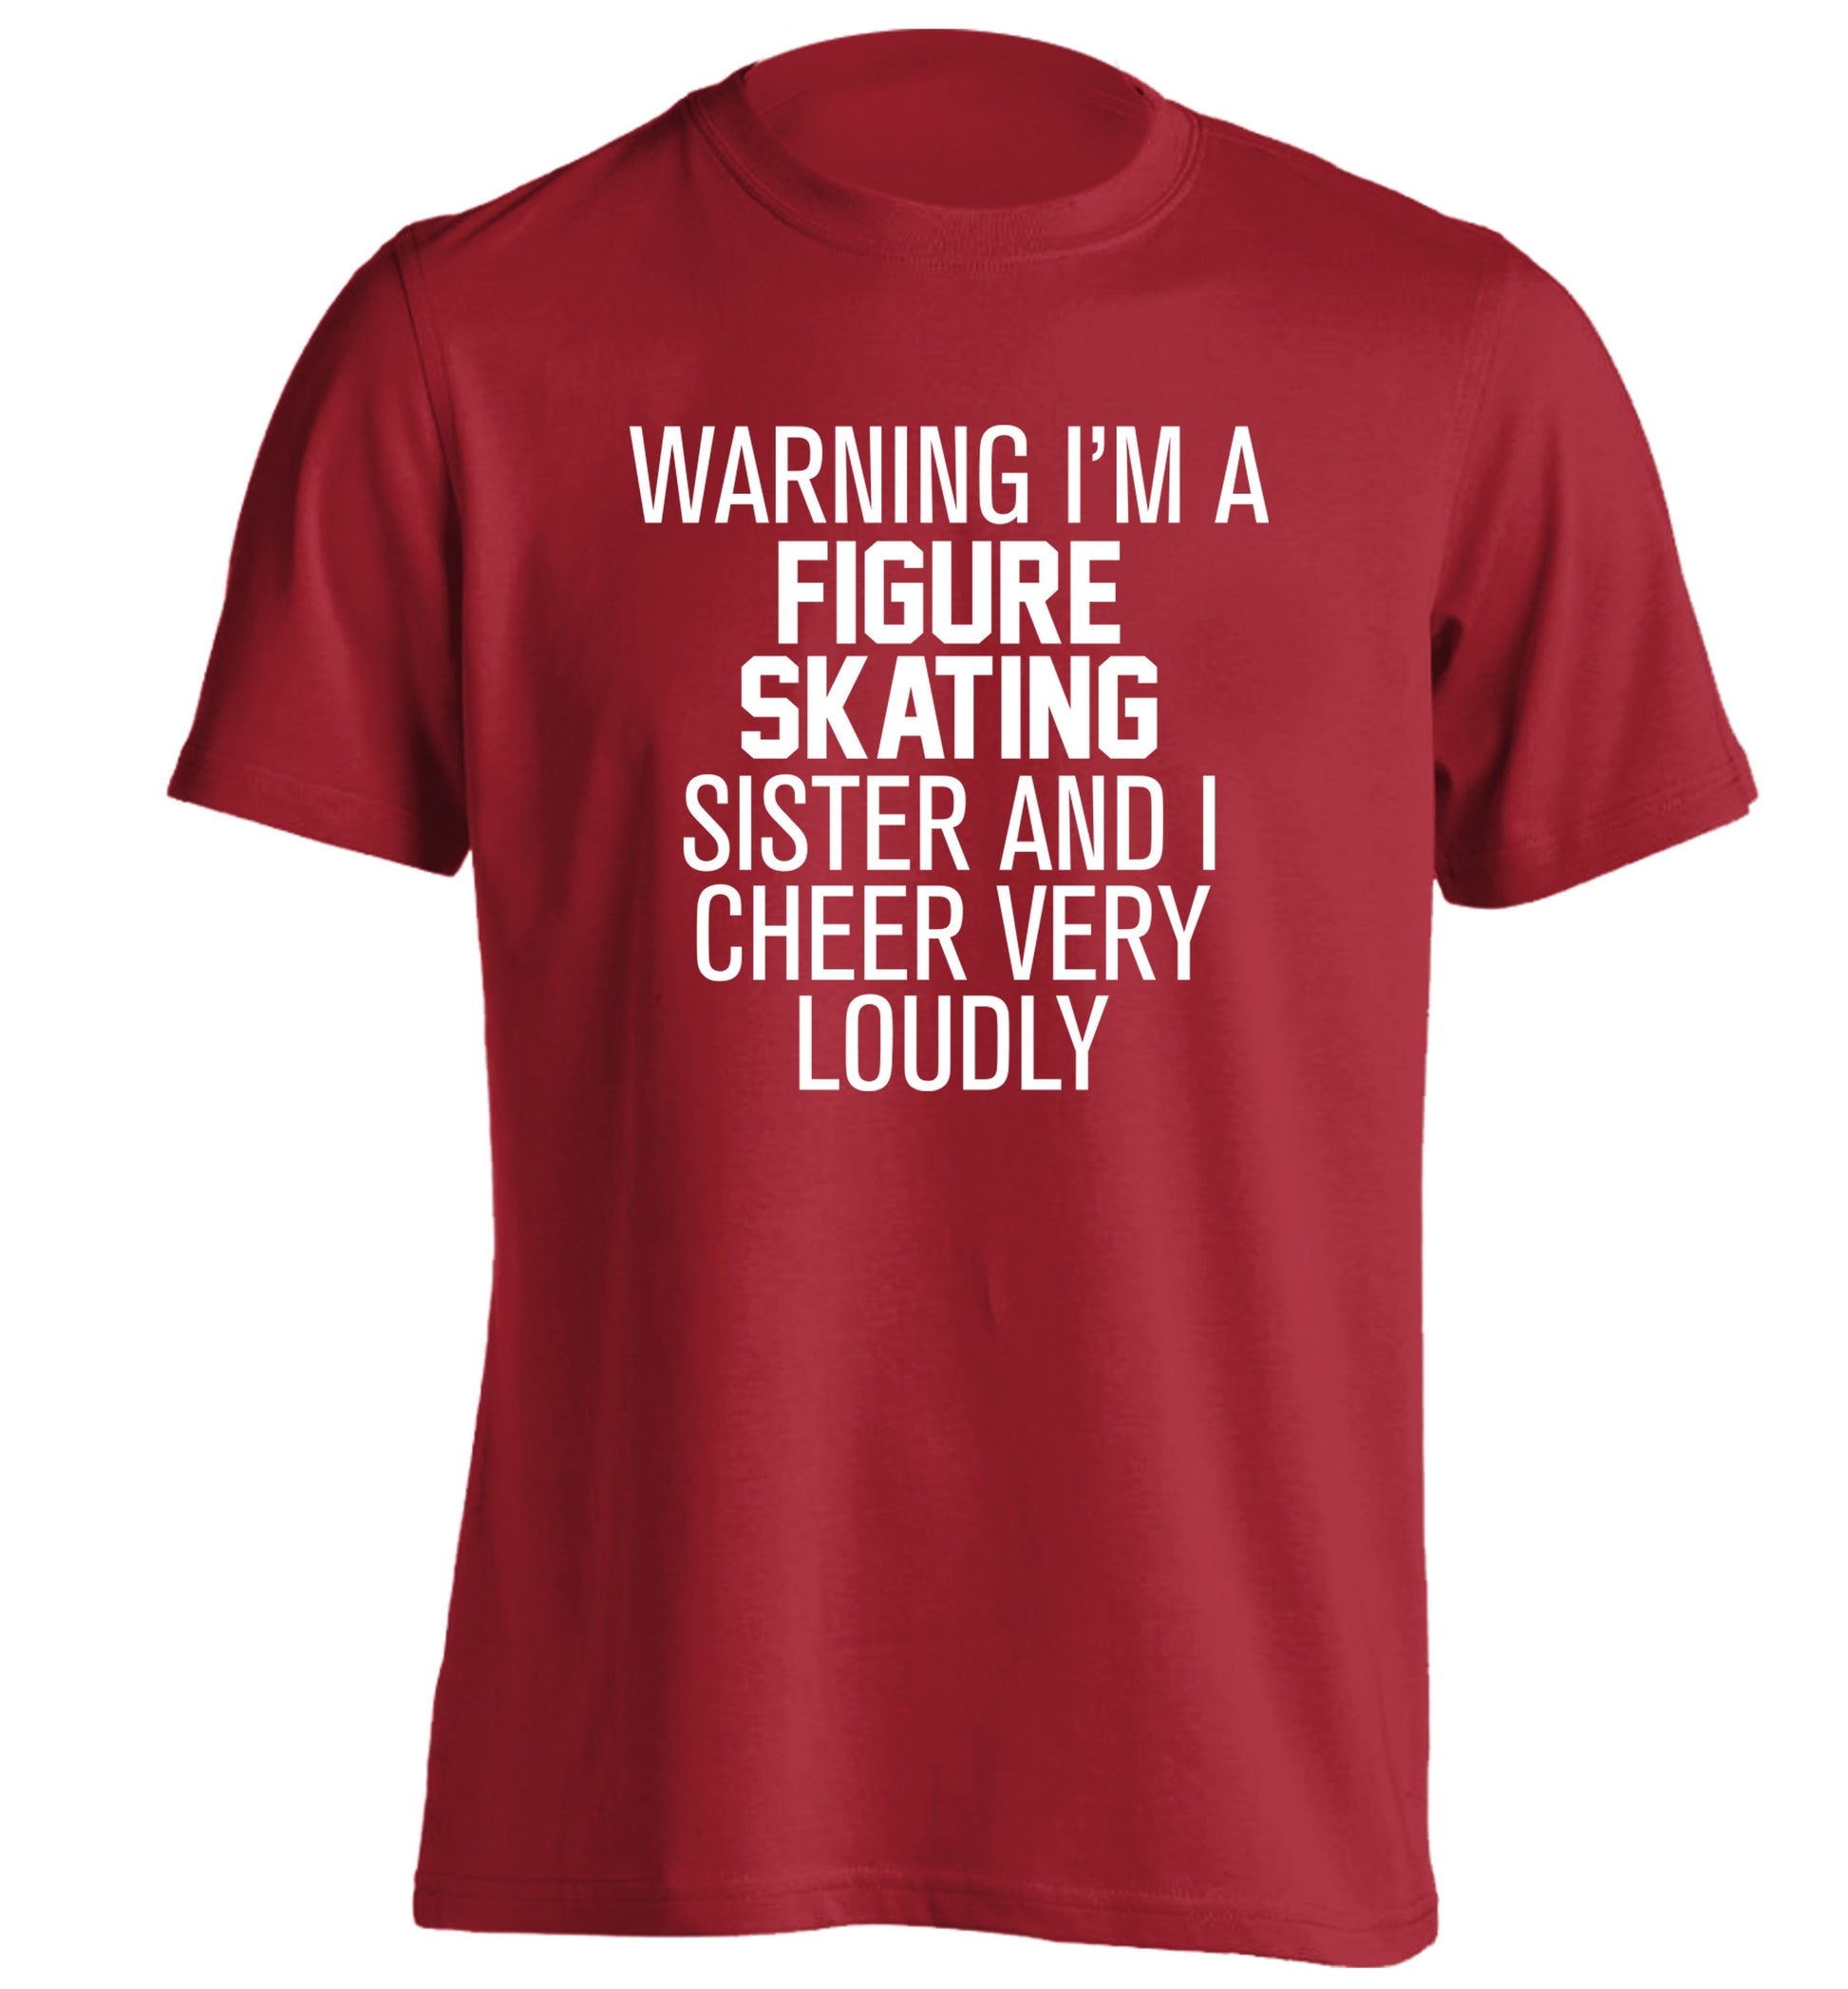 Warning I'm a figure skating sister and I cheer very loudly adults unisexred Tshirt 2XL